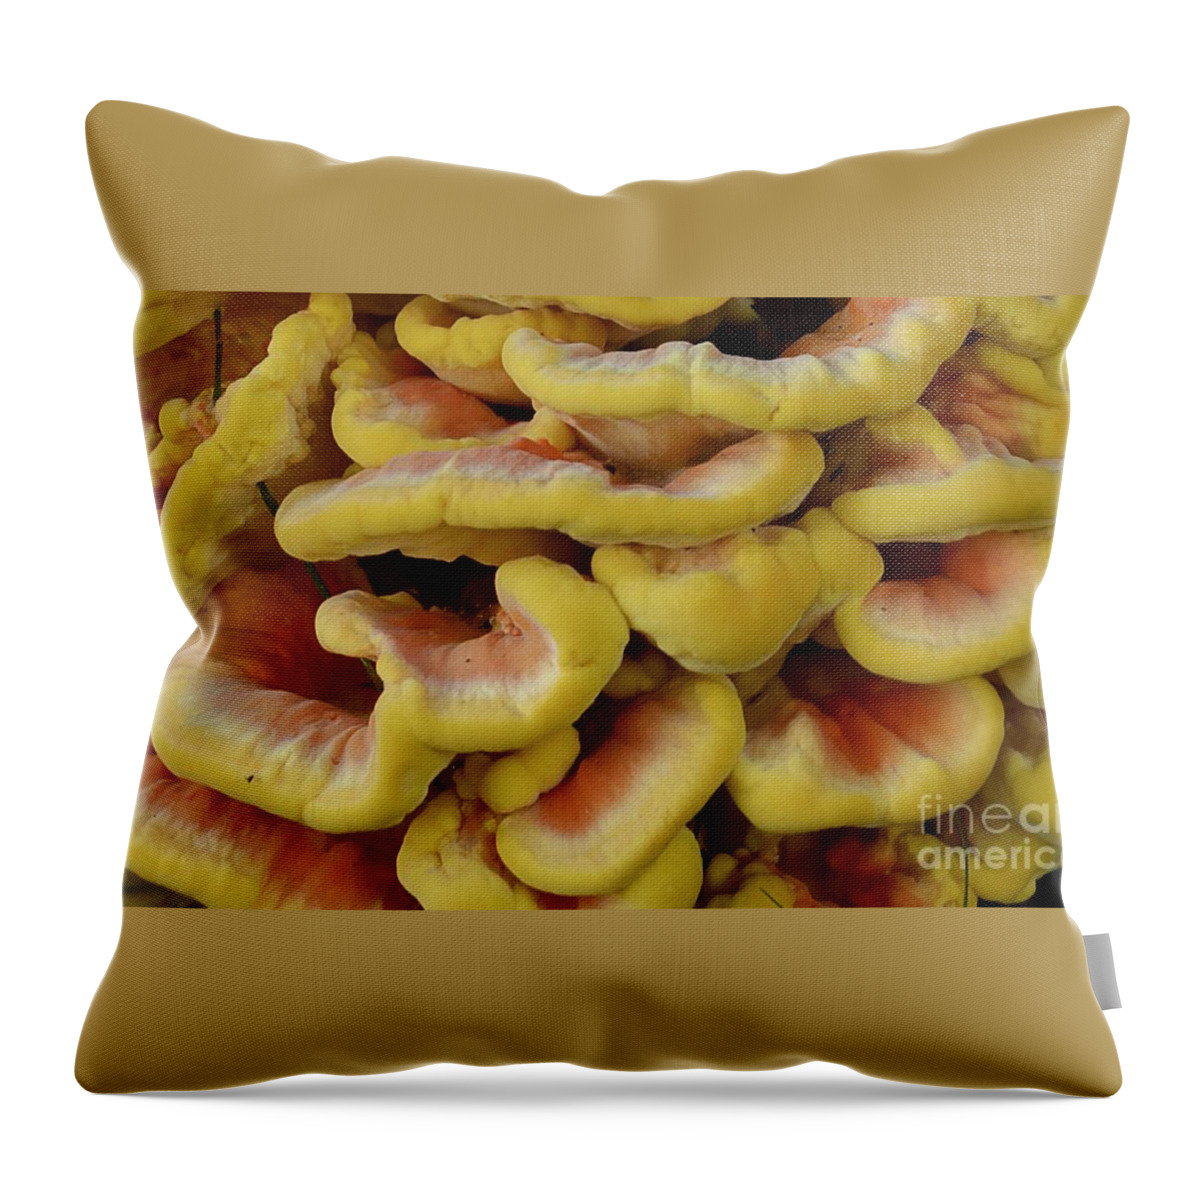 High Virginia Images Throw Pillow featuring the photograph Pretty Chicken by Randy Bodkins